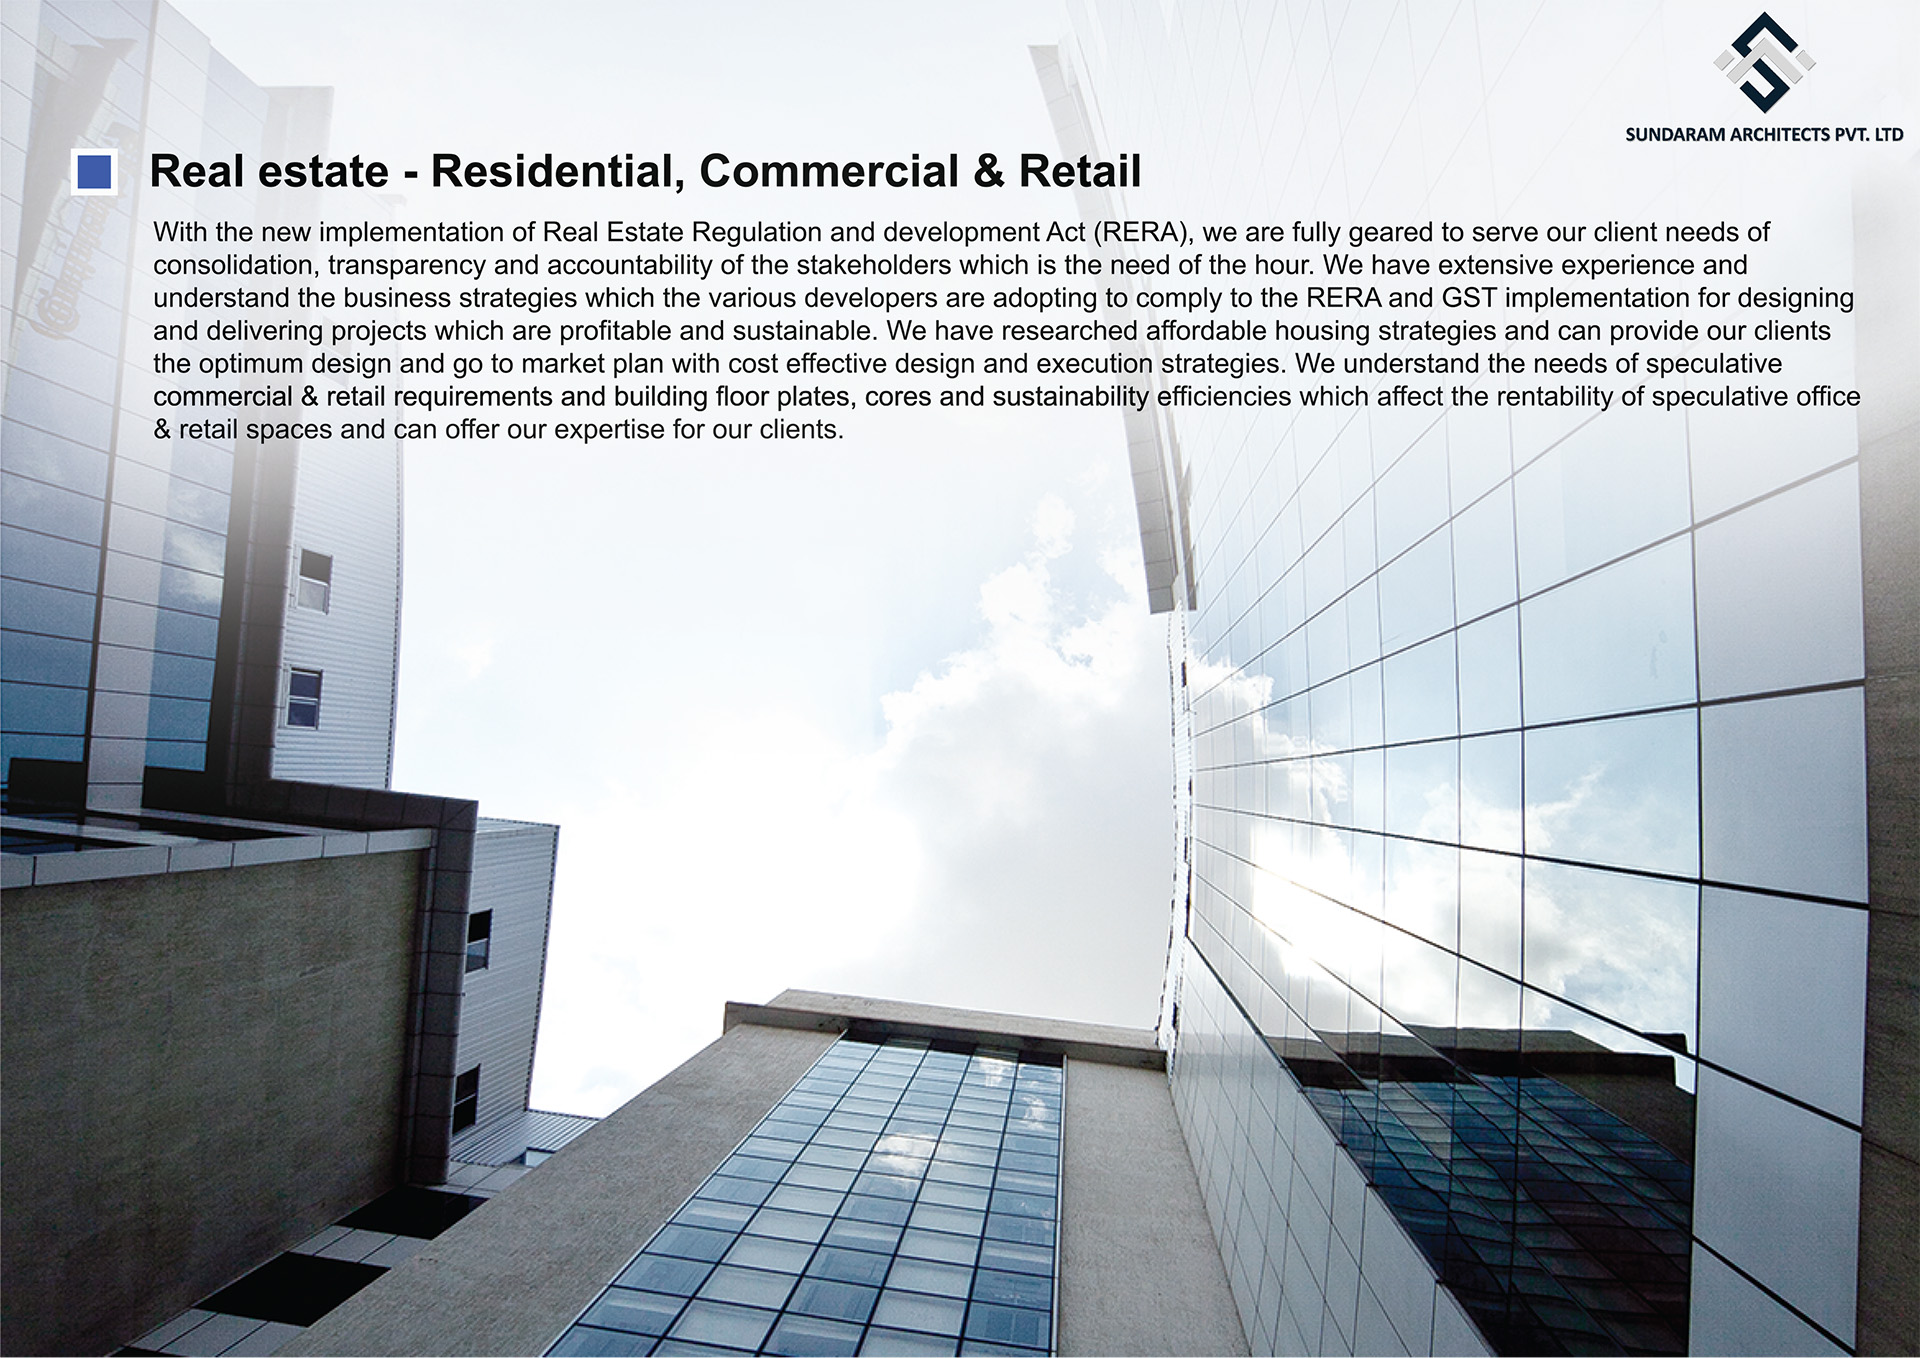 Real Estate Residential, Commercial & Retail - Real Estate - Residential & Commercial Design